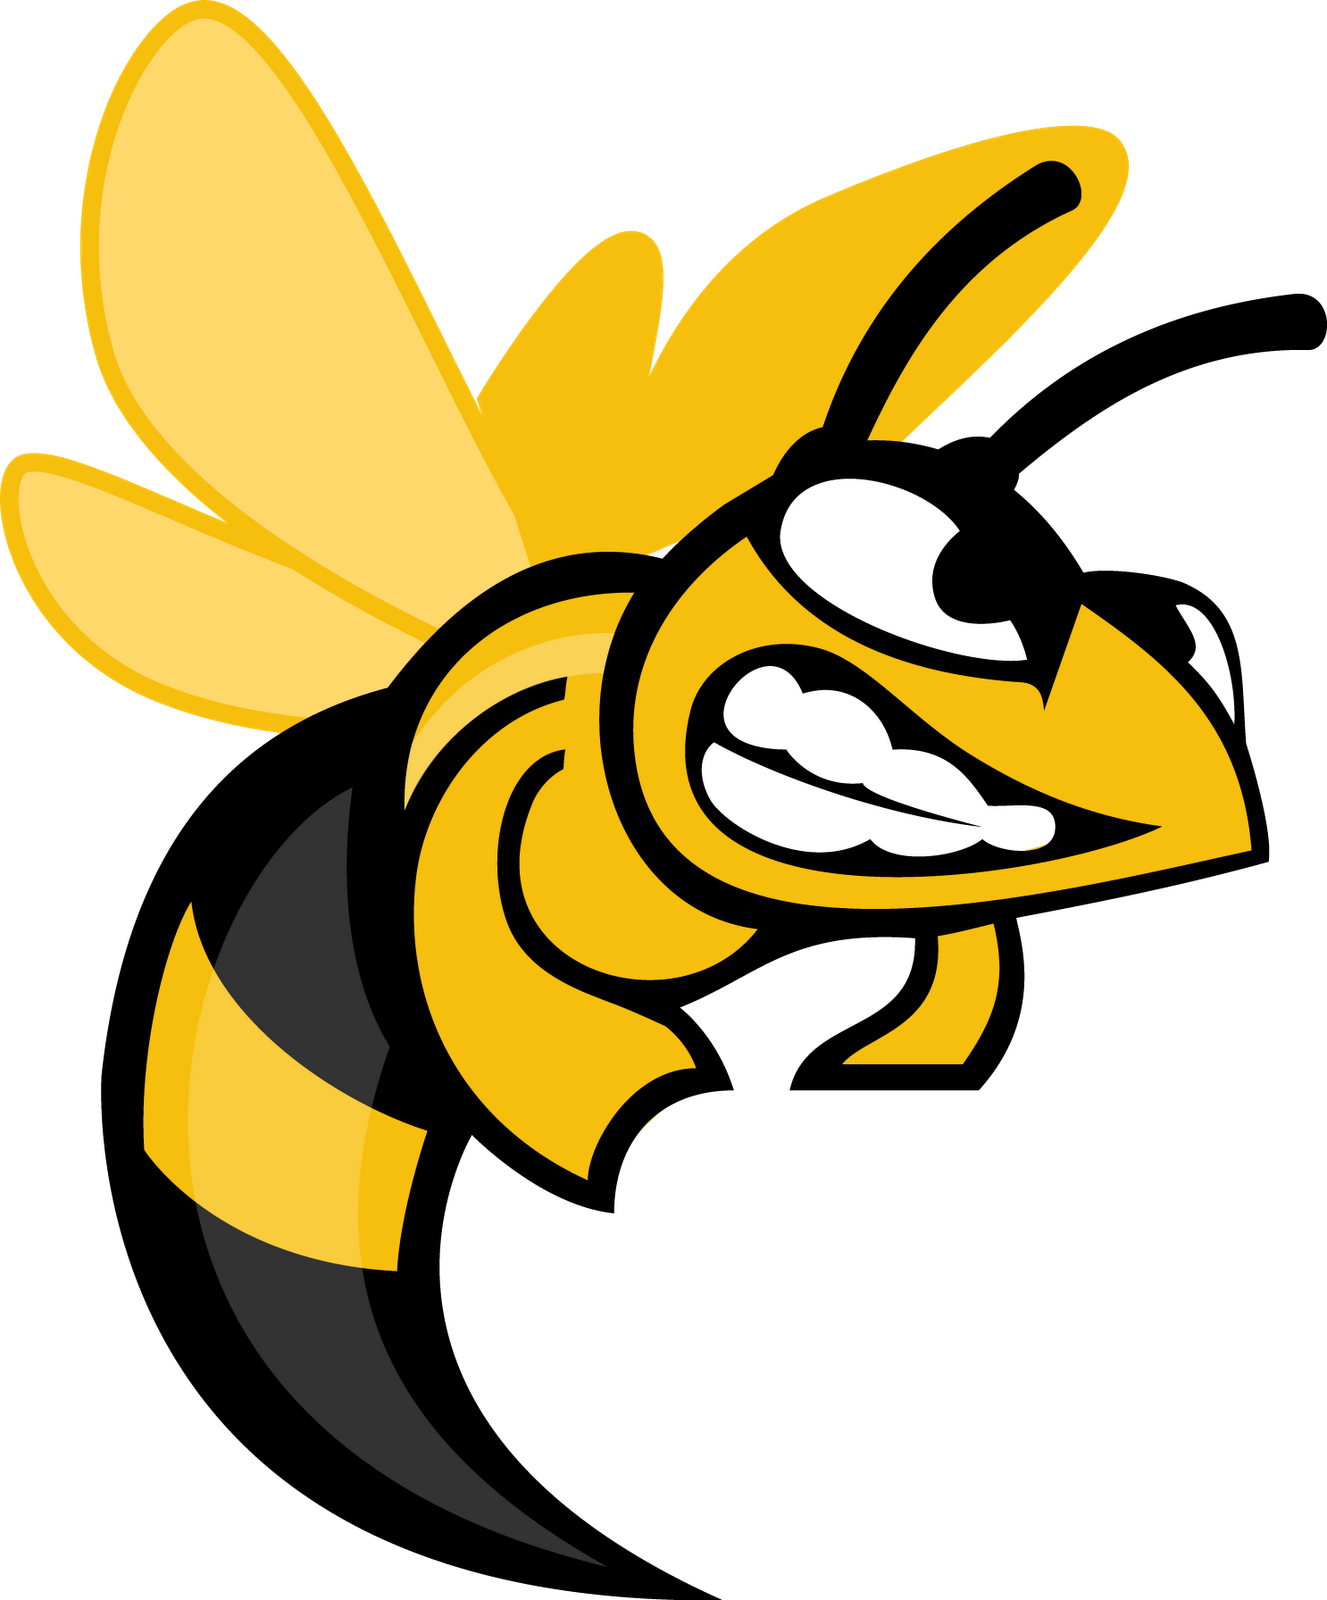 Image result for wasp clipart